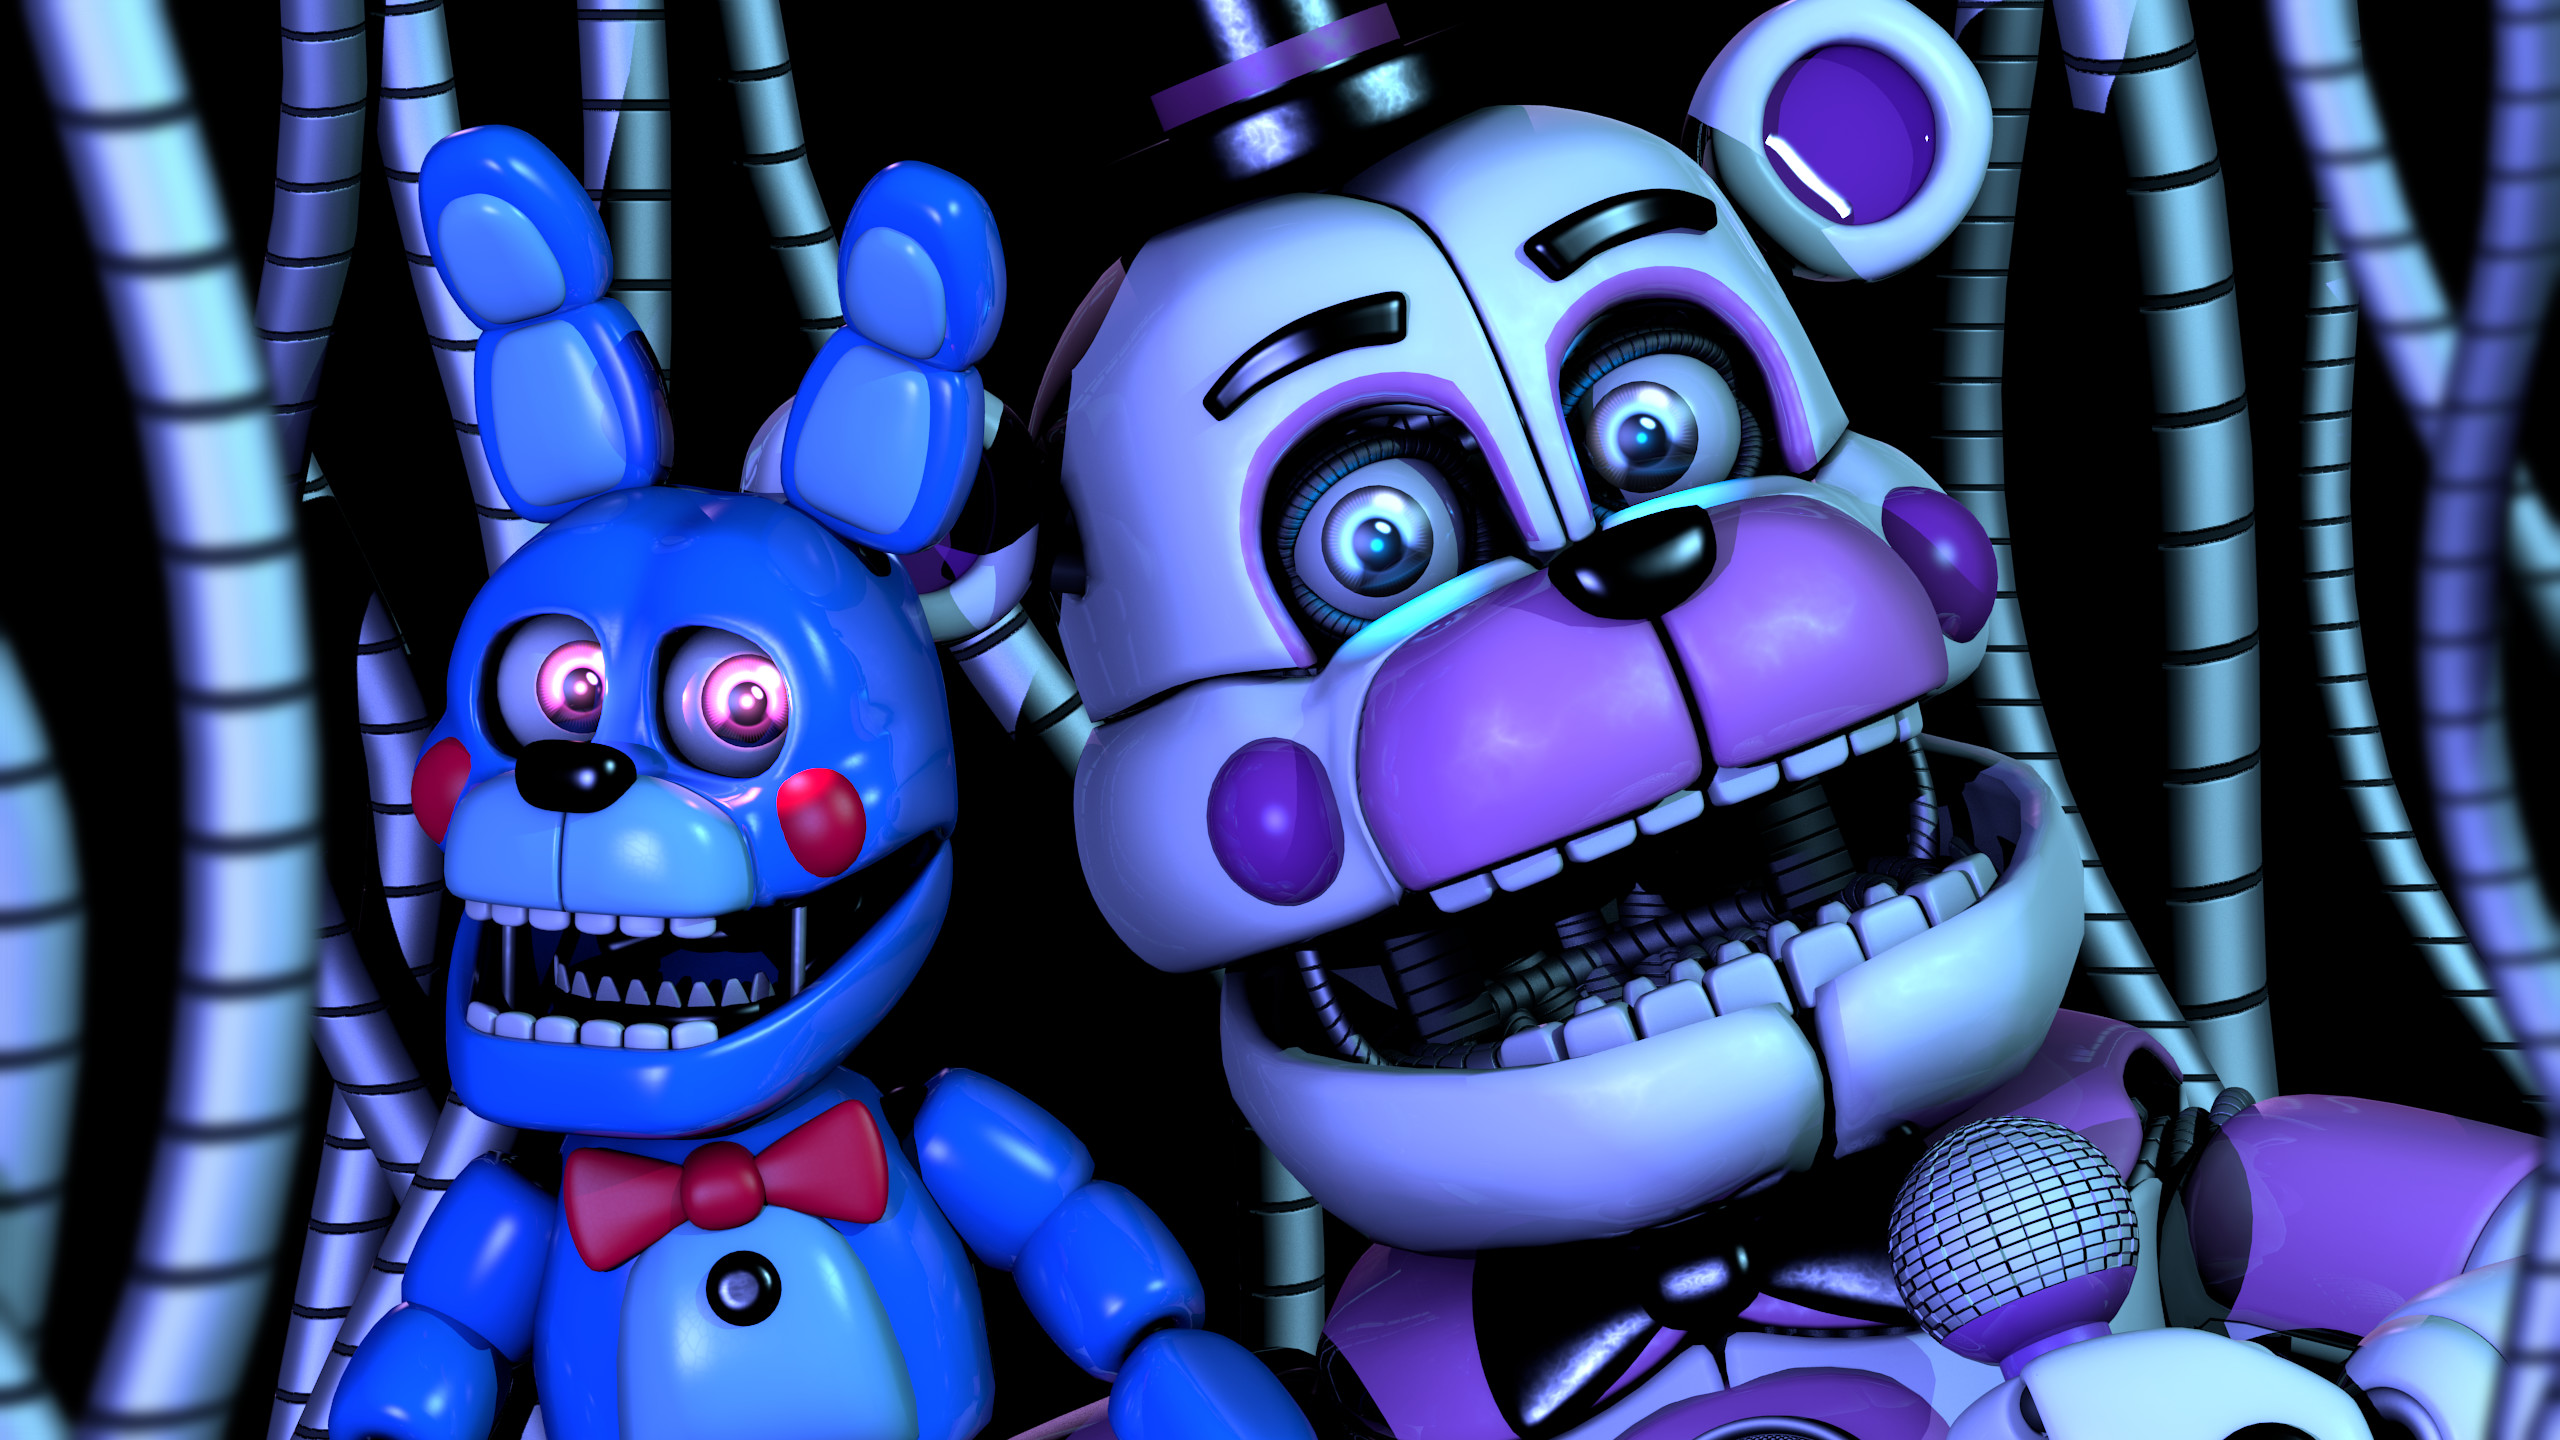 2560x1440 Funtime Freddy Wallpaper by MateusRiff Funtime Freddy Wallpaper by  MateusRiff